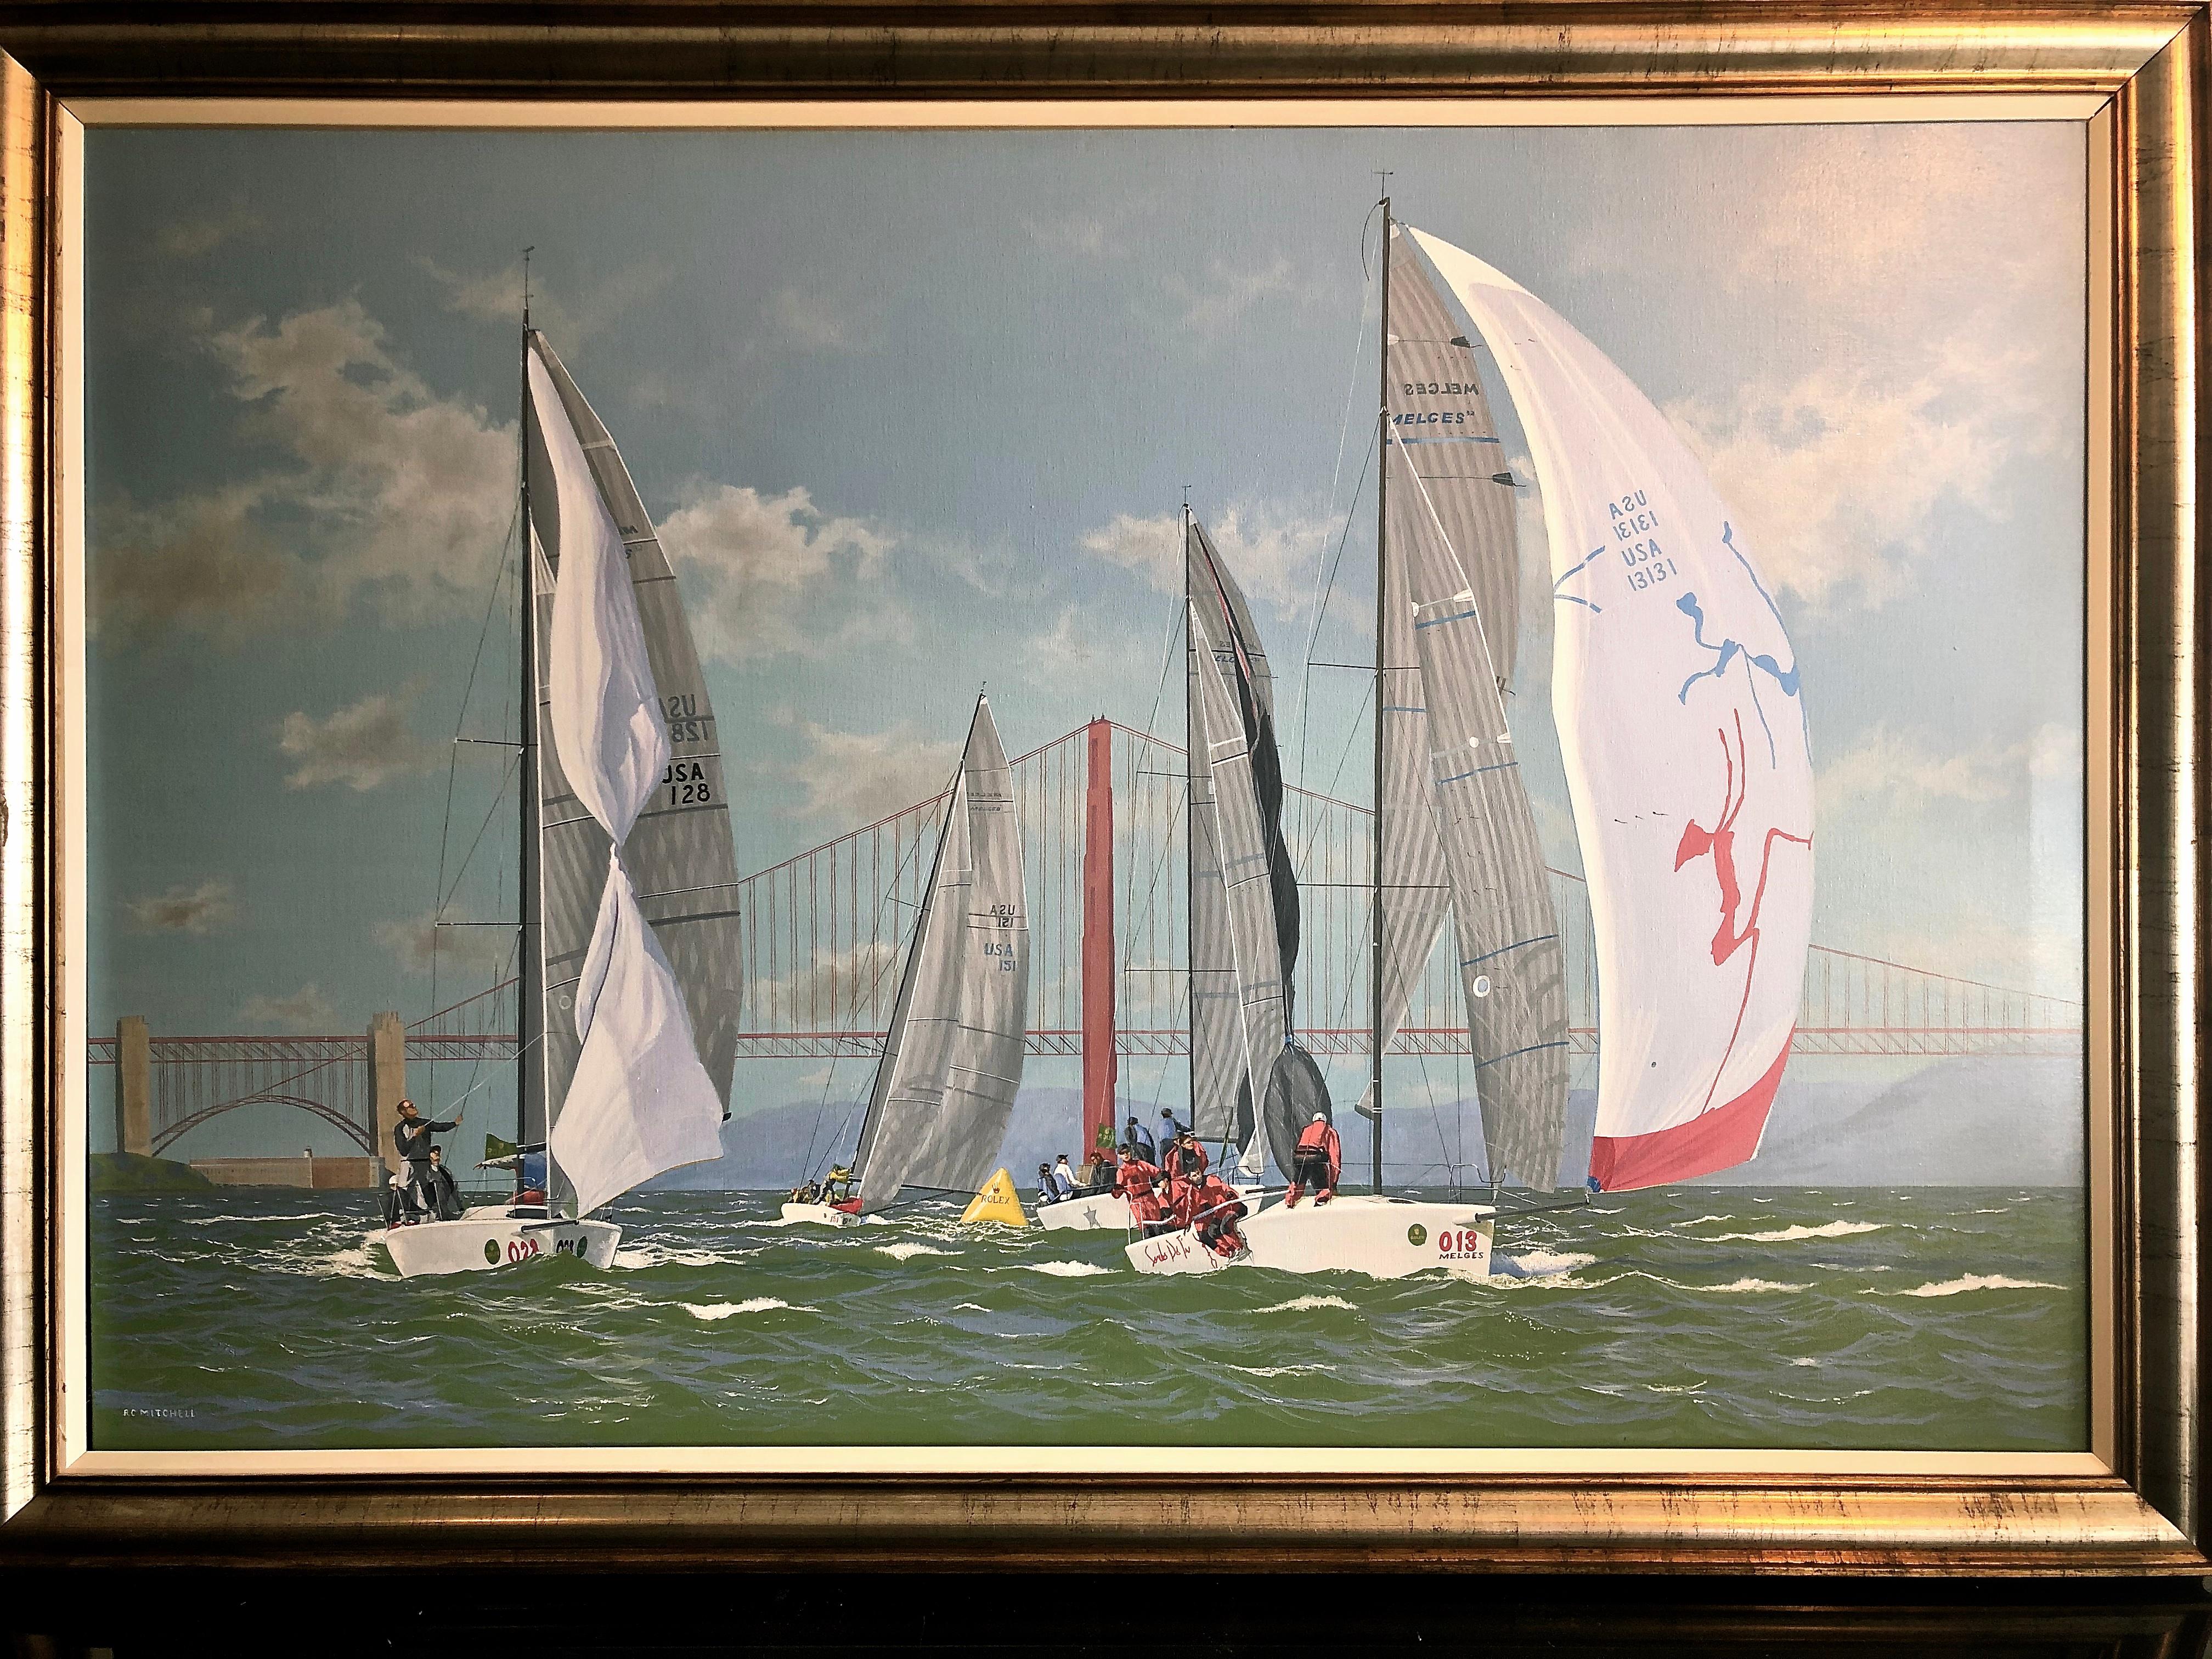 Nautor Swan Cowes Regatta - Painting by Ronald Charles Mitchell